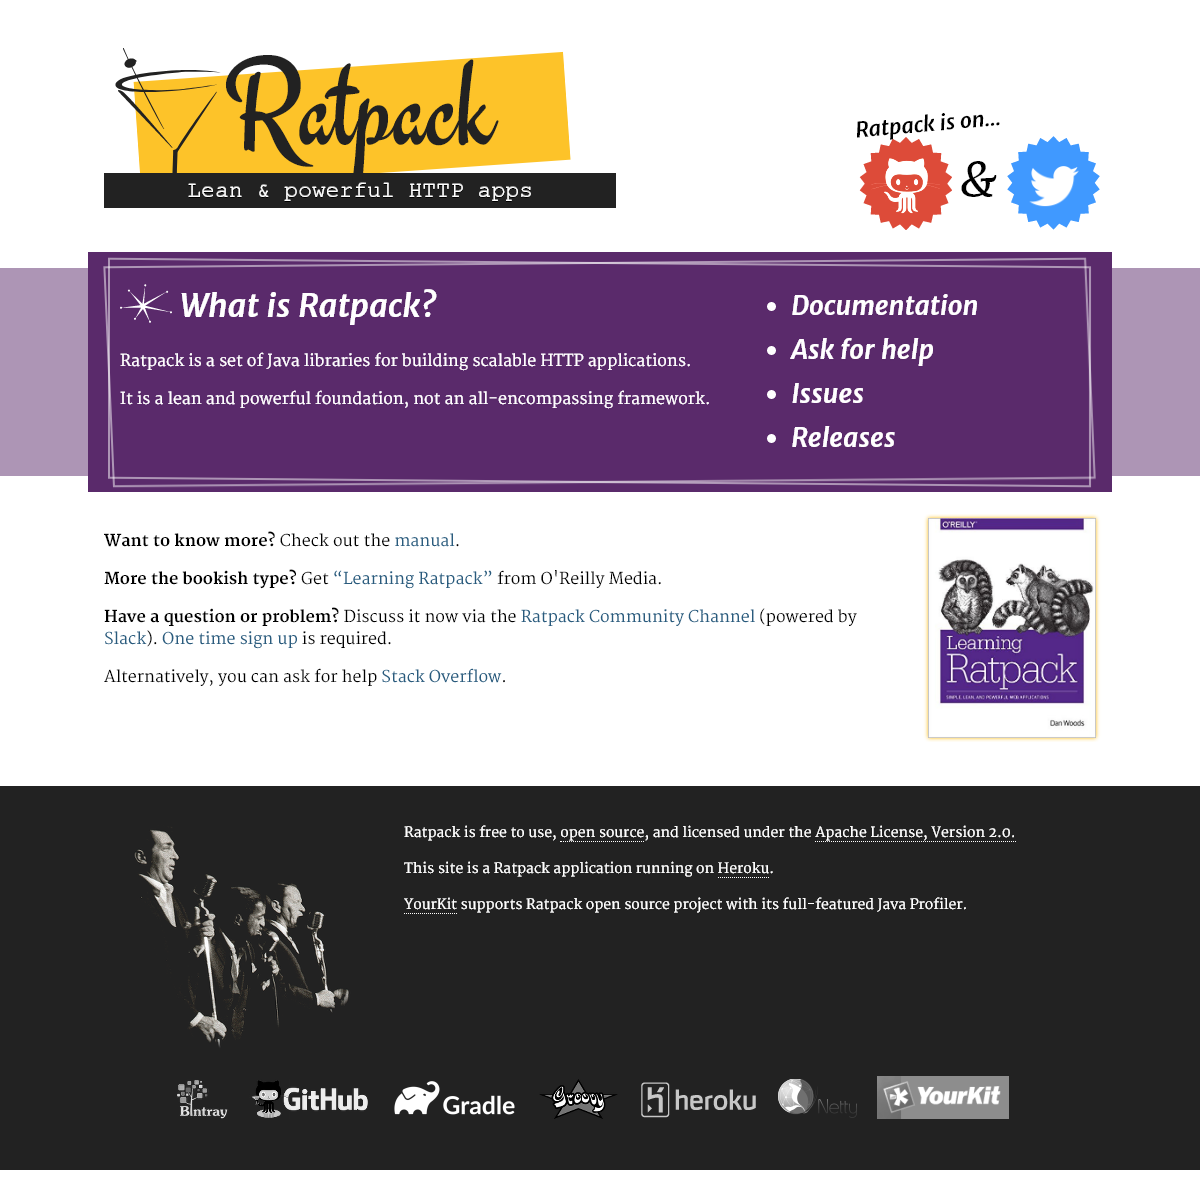 A complete backup of ratpack.io